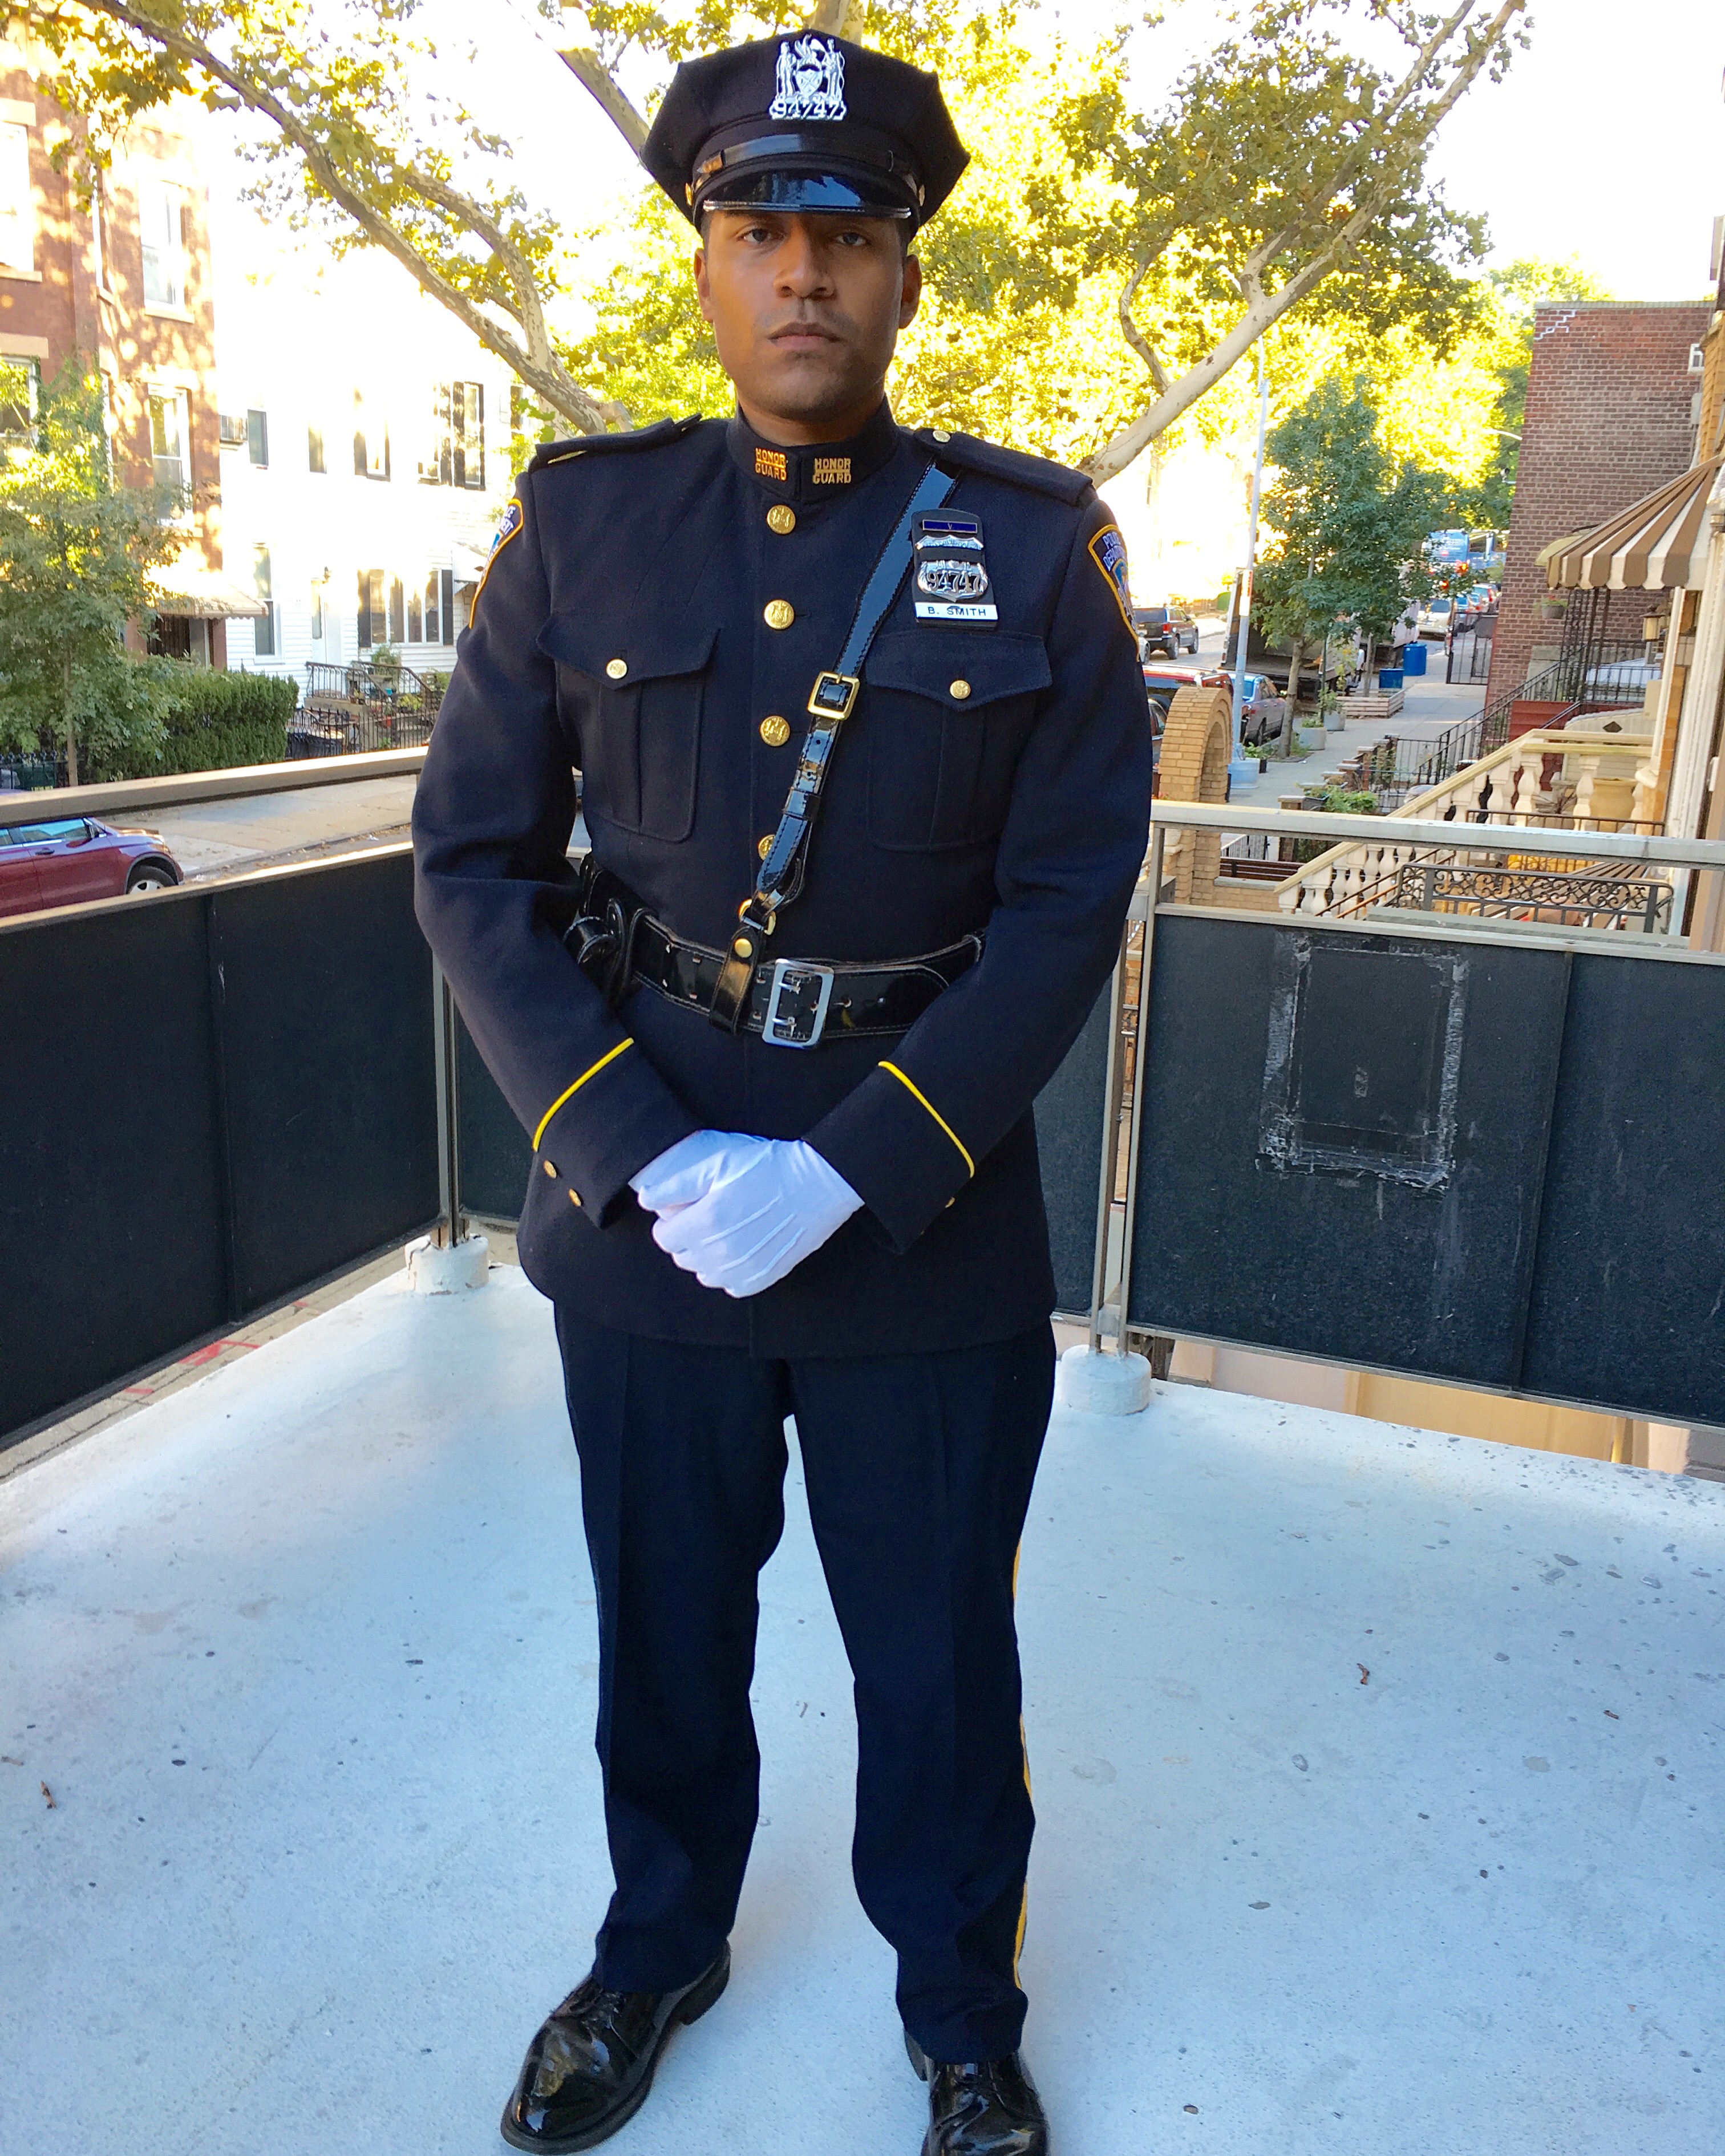 BTS filming for the new TV Series Shades of Blue playing Officer B. Scott.